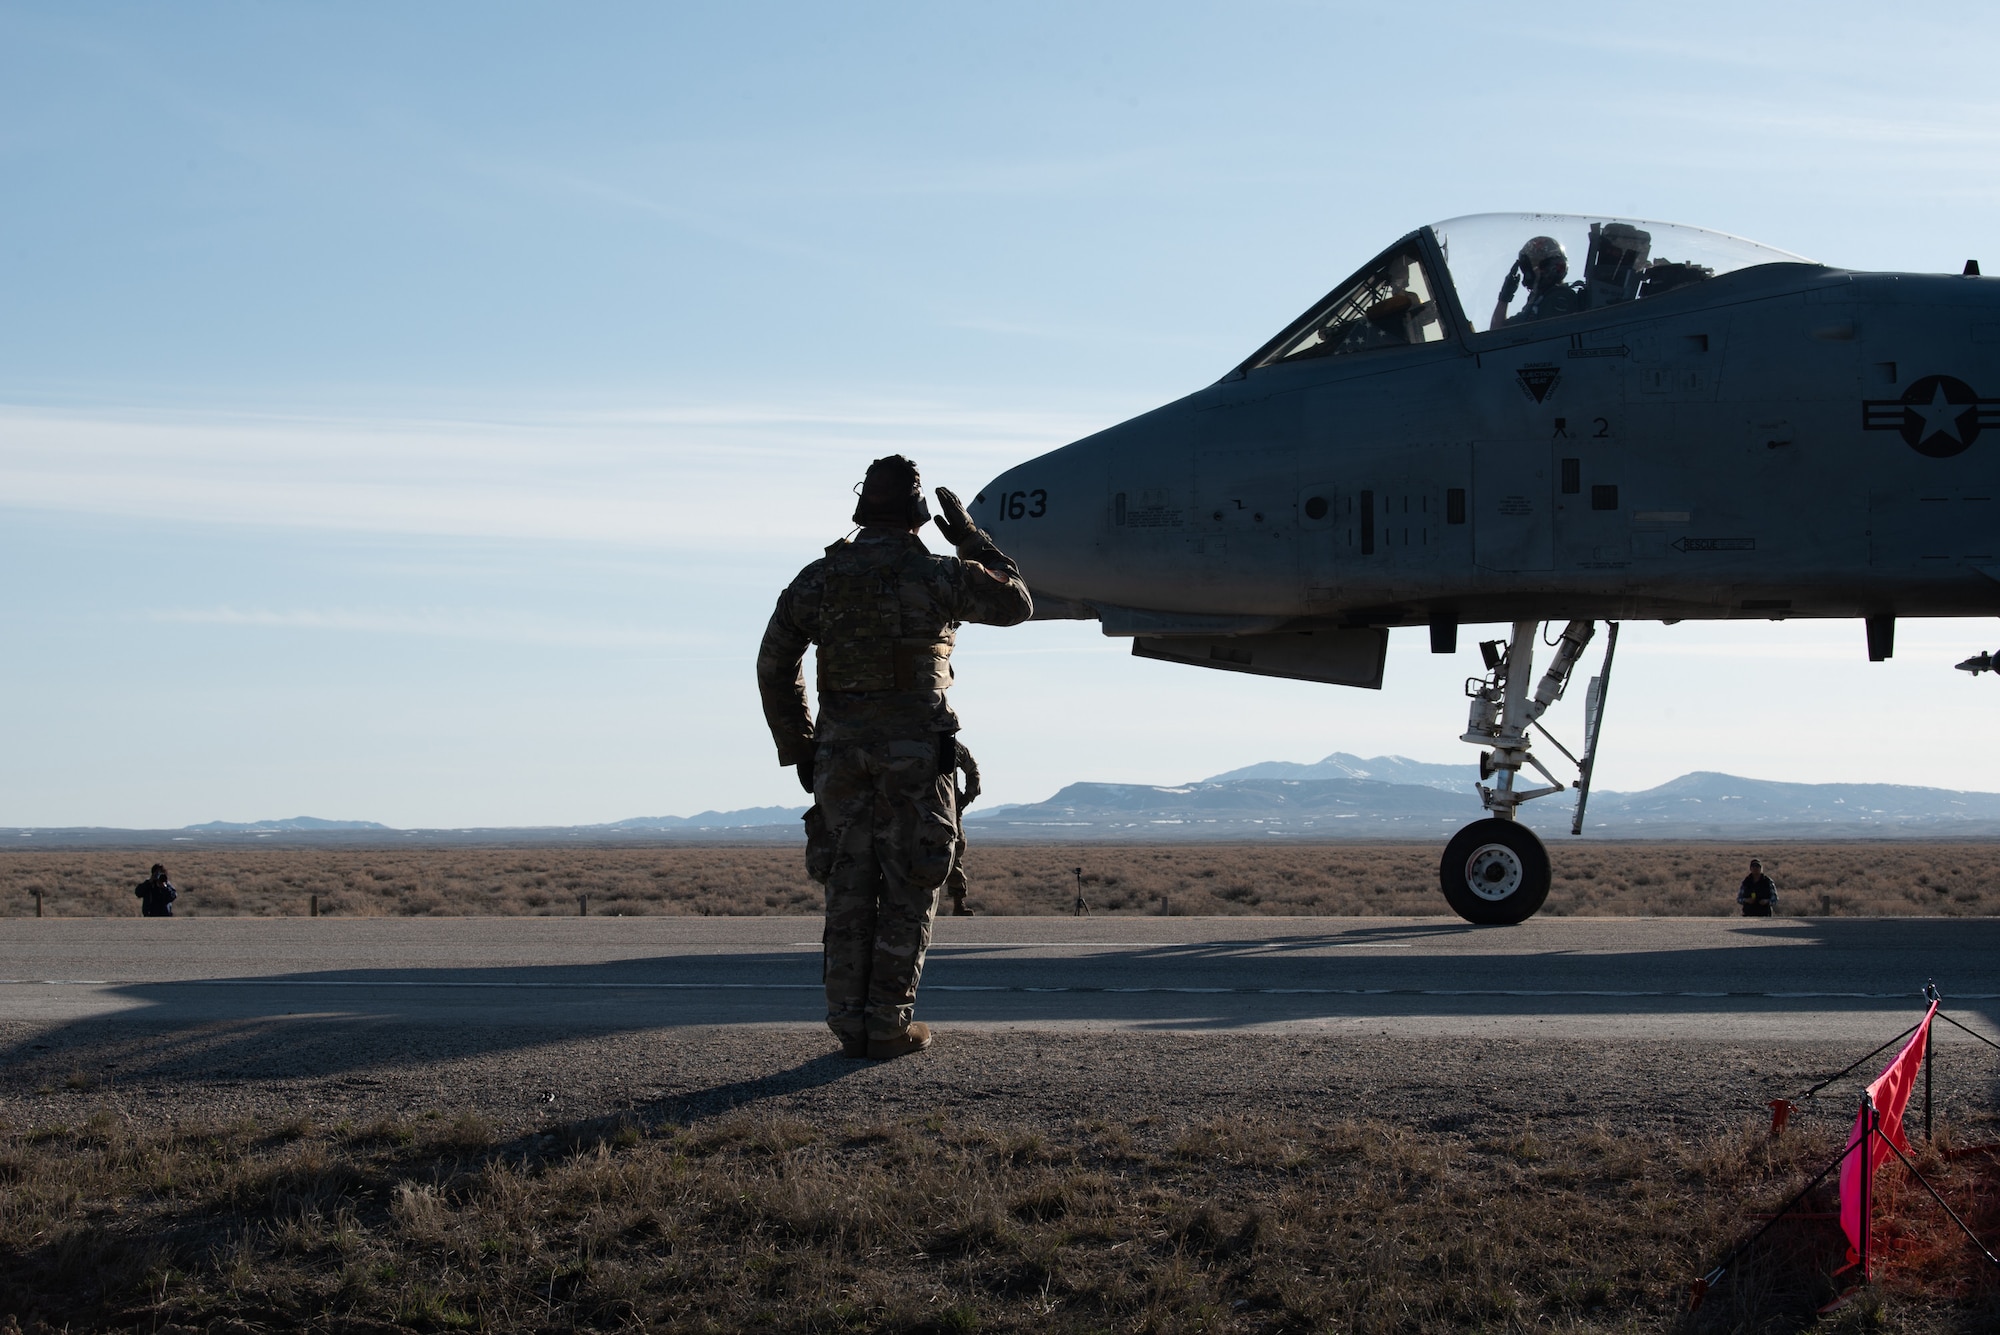 A pilot with the 127th Fighter Wing prepares to take off from Highway 287 in Wyoming during Exercise Agile Chariot on April 30, 2023, honing capabilities linked to Agile Combat Employment. Instead of relying on large, fixed bases and infrastructure, ACE employs smaller, more dispersed locations and teams to rapidly move aircraft, pilots and other personnel as needed. Under ACE, millions of miles of public roads can serve as functional runways with Forward Arming and Refueling Points when necessary. (U.S. Air National Guard photo by Master Sgt. Phil Speck)